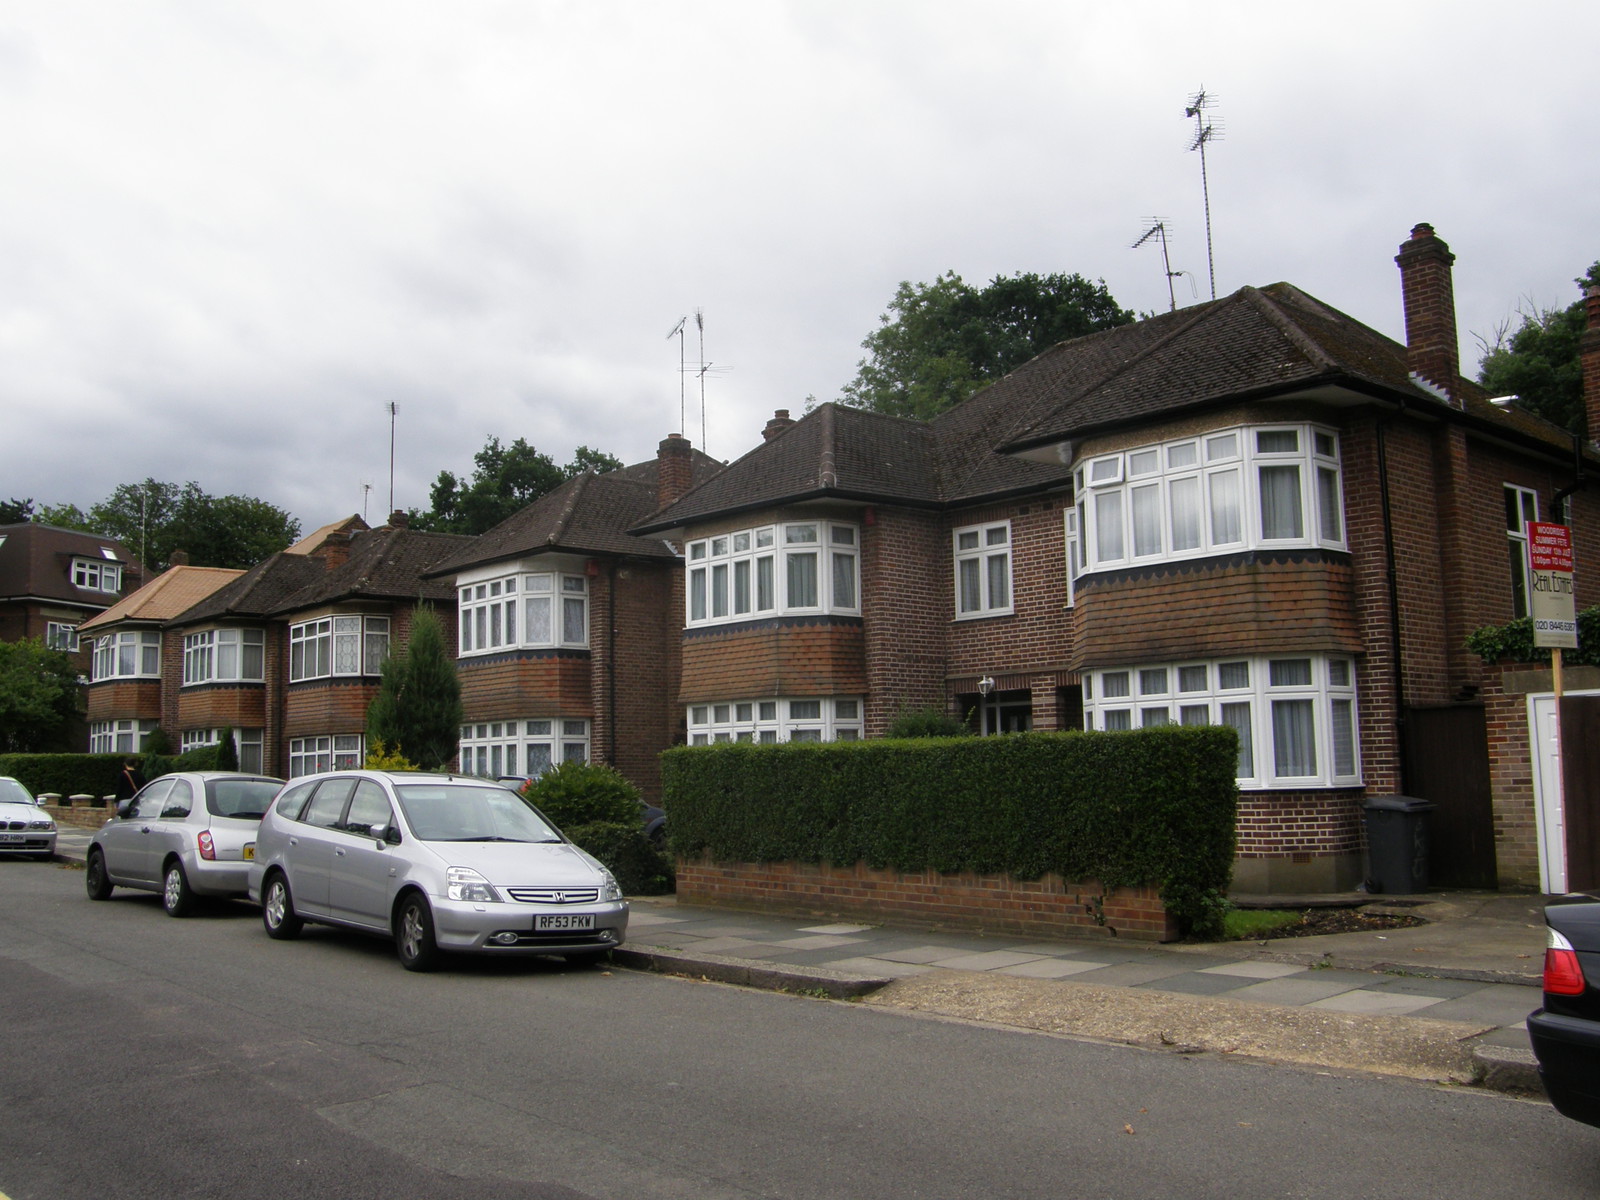 Image from East Finchley to Mill Hill East and High Barnet